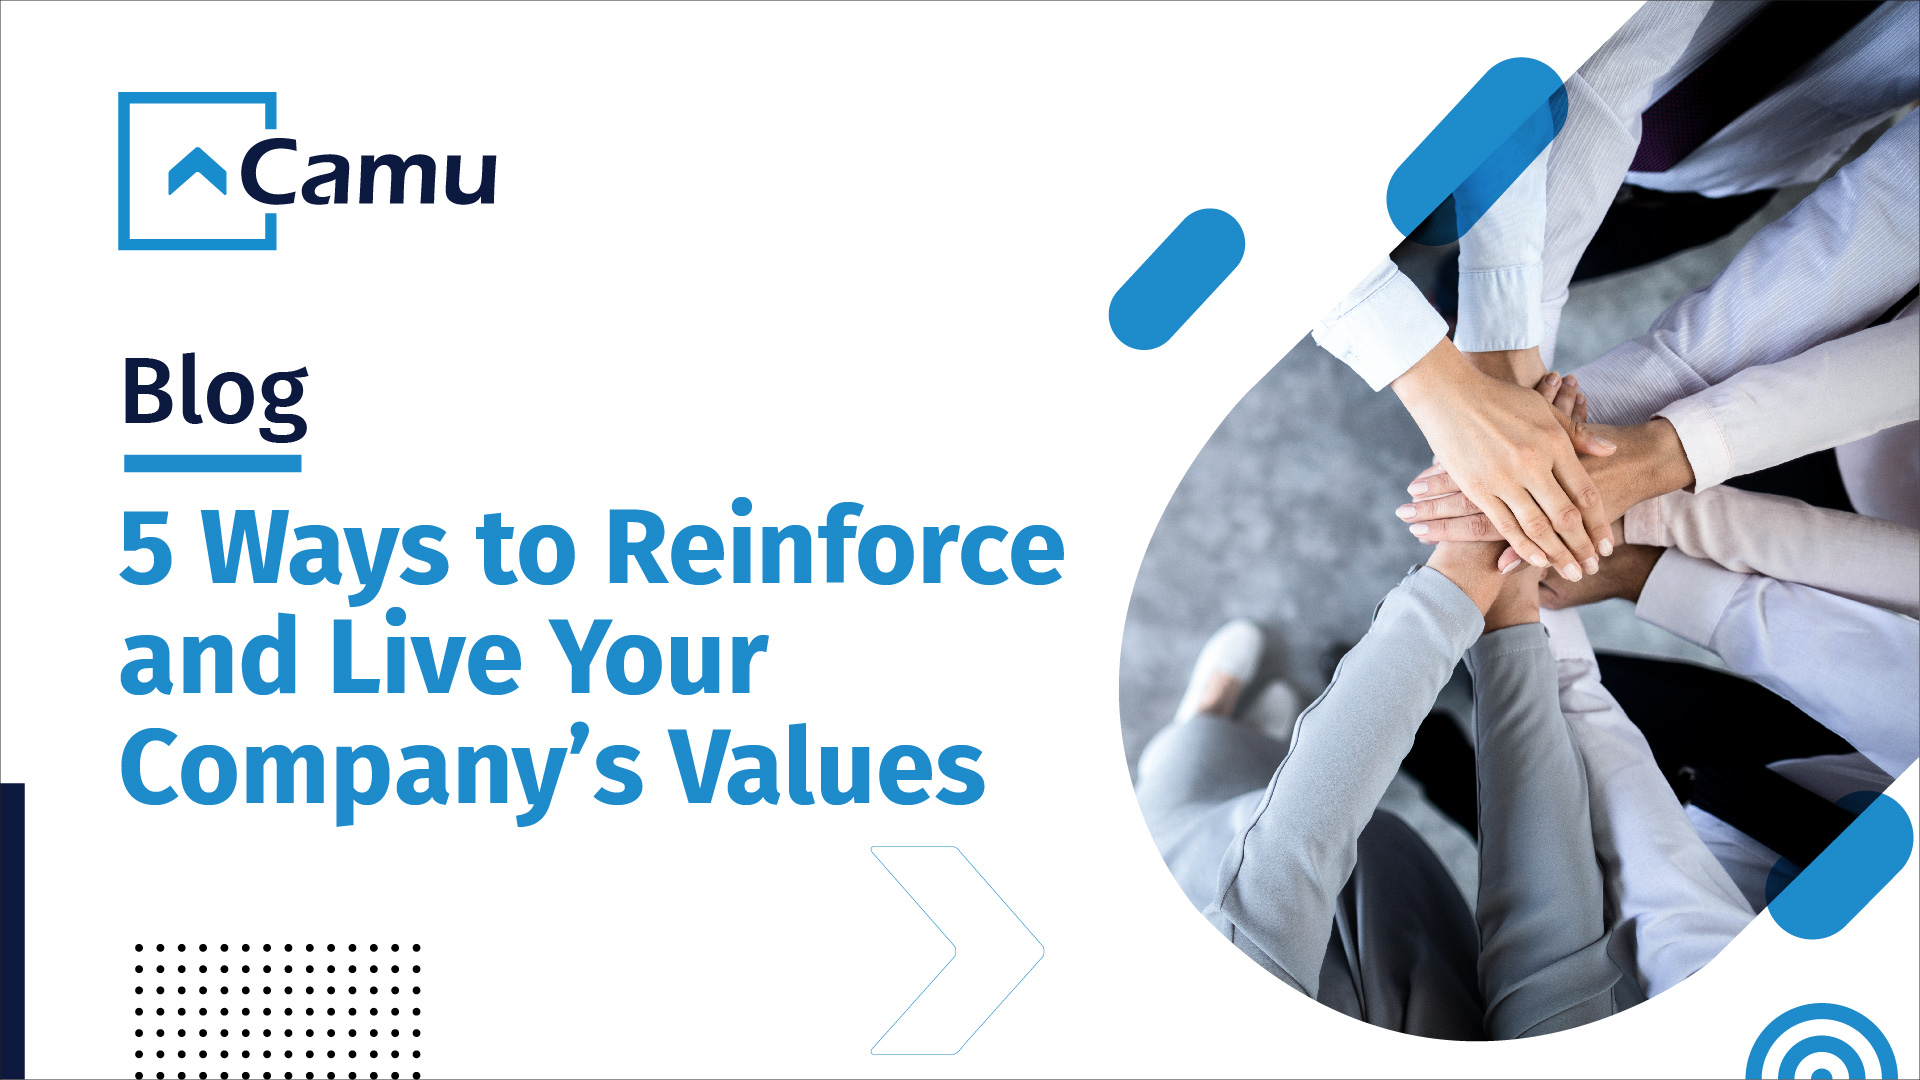 5 ways to Reinforce and live your Company's Values